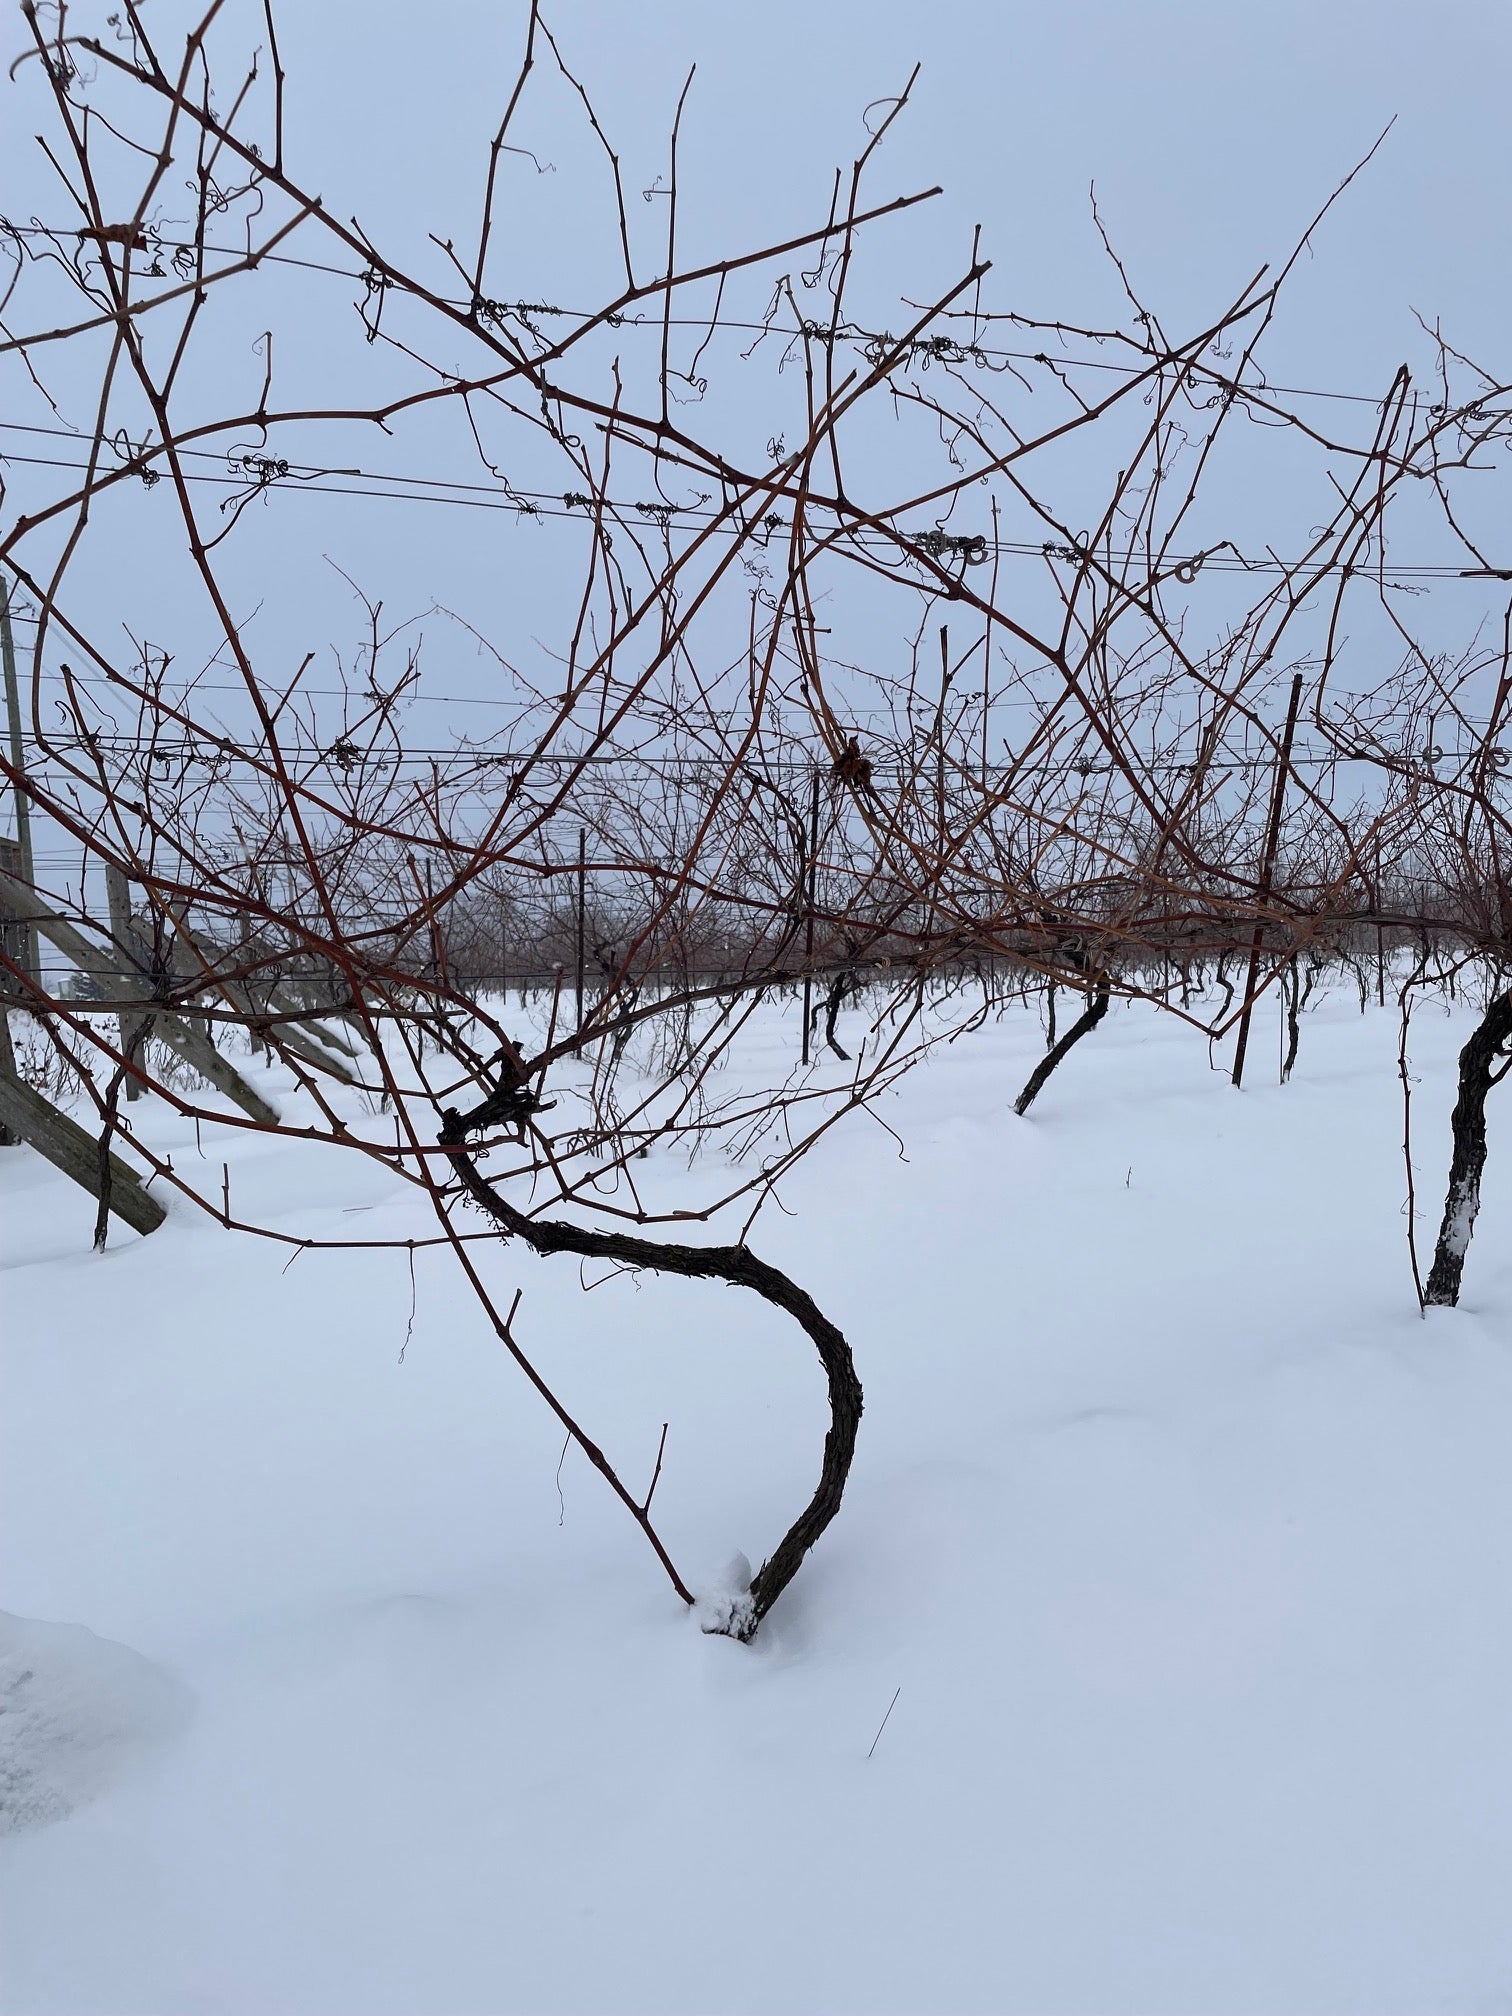 Winter Resilience: The Remarkable Survival of Ontario's Grapevines